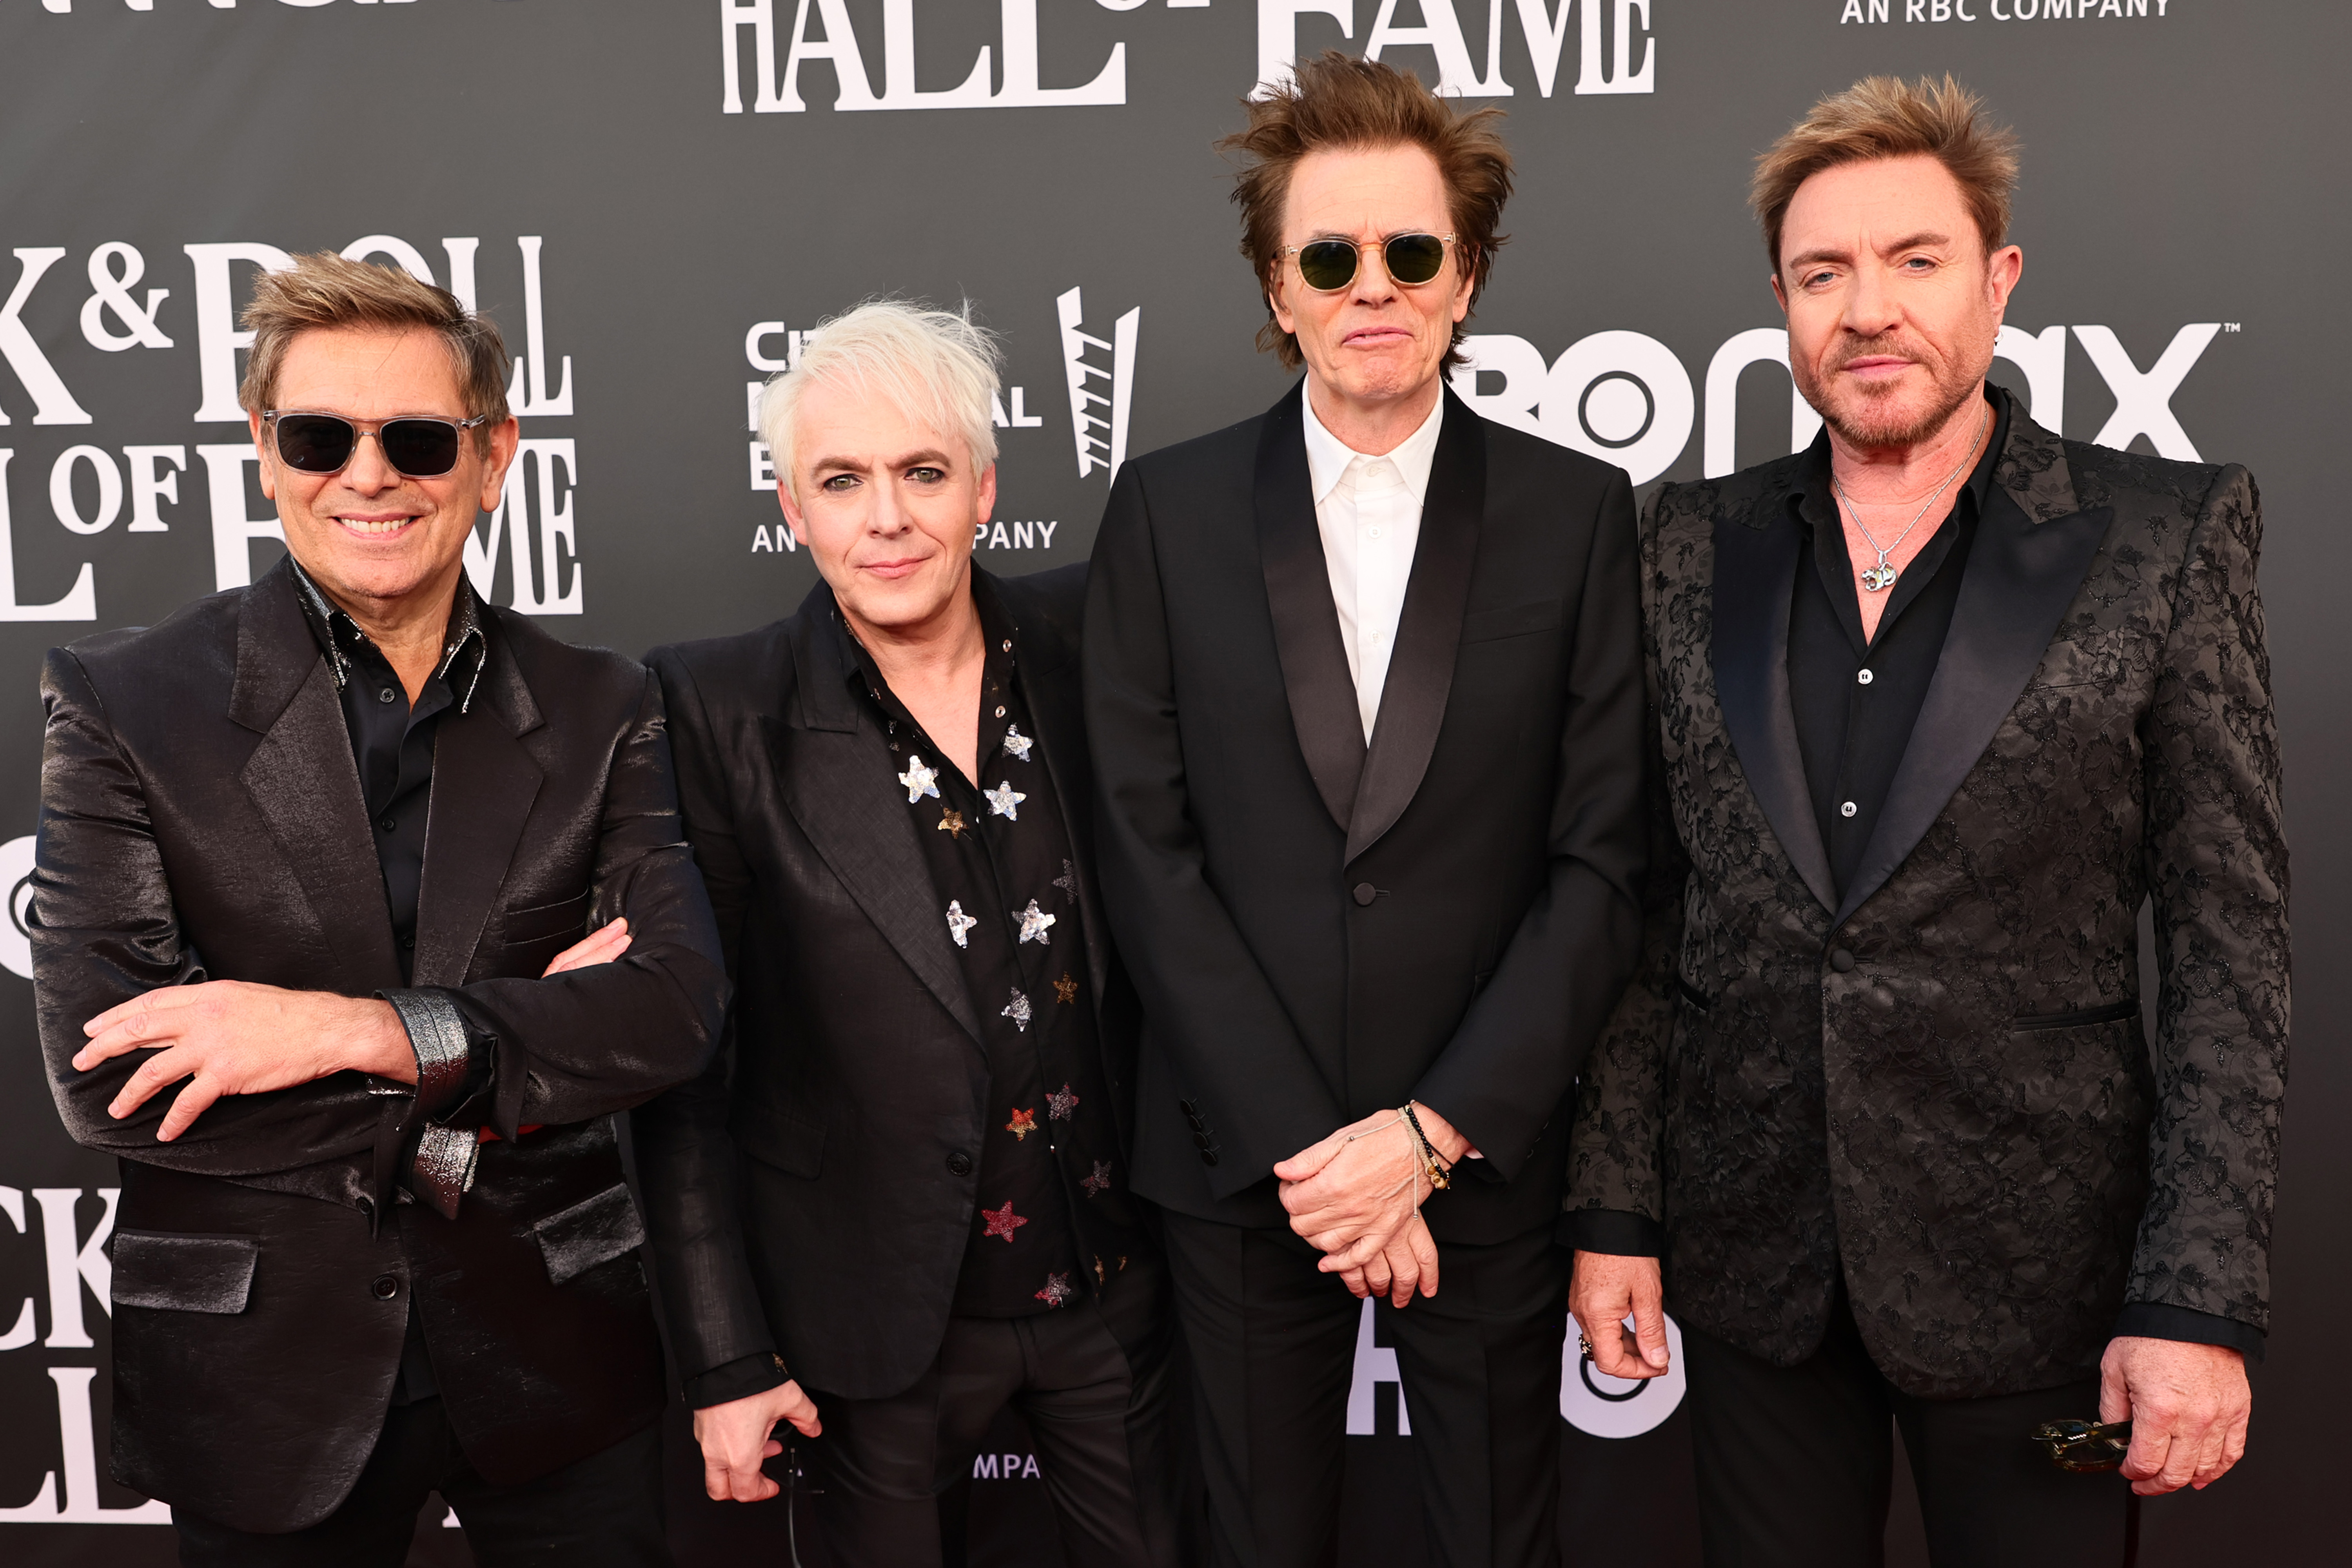 From Left to right: Roger Taylor, Nick Rhodes, John Taylor, and Simon Le Bon of Duran Duran attend the 37th Annual Rock & Roll Hall of Fame Induction Ceremony in LA on November 5.